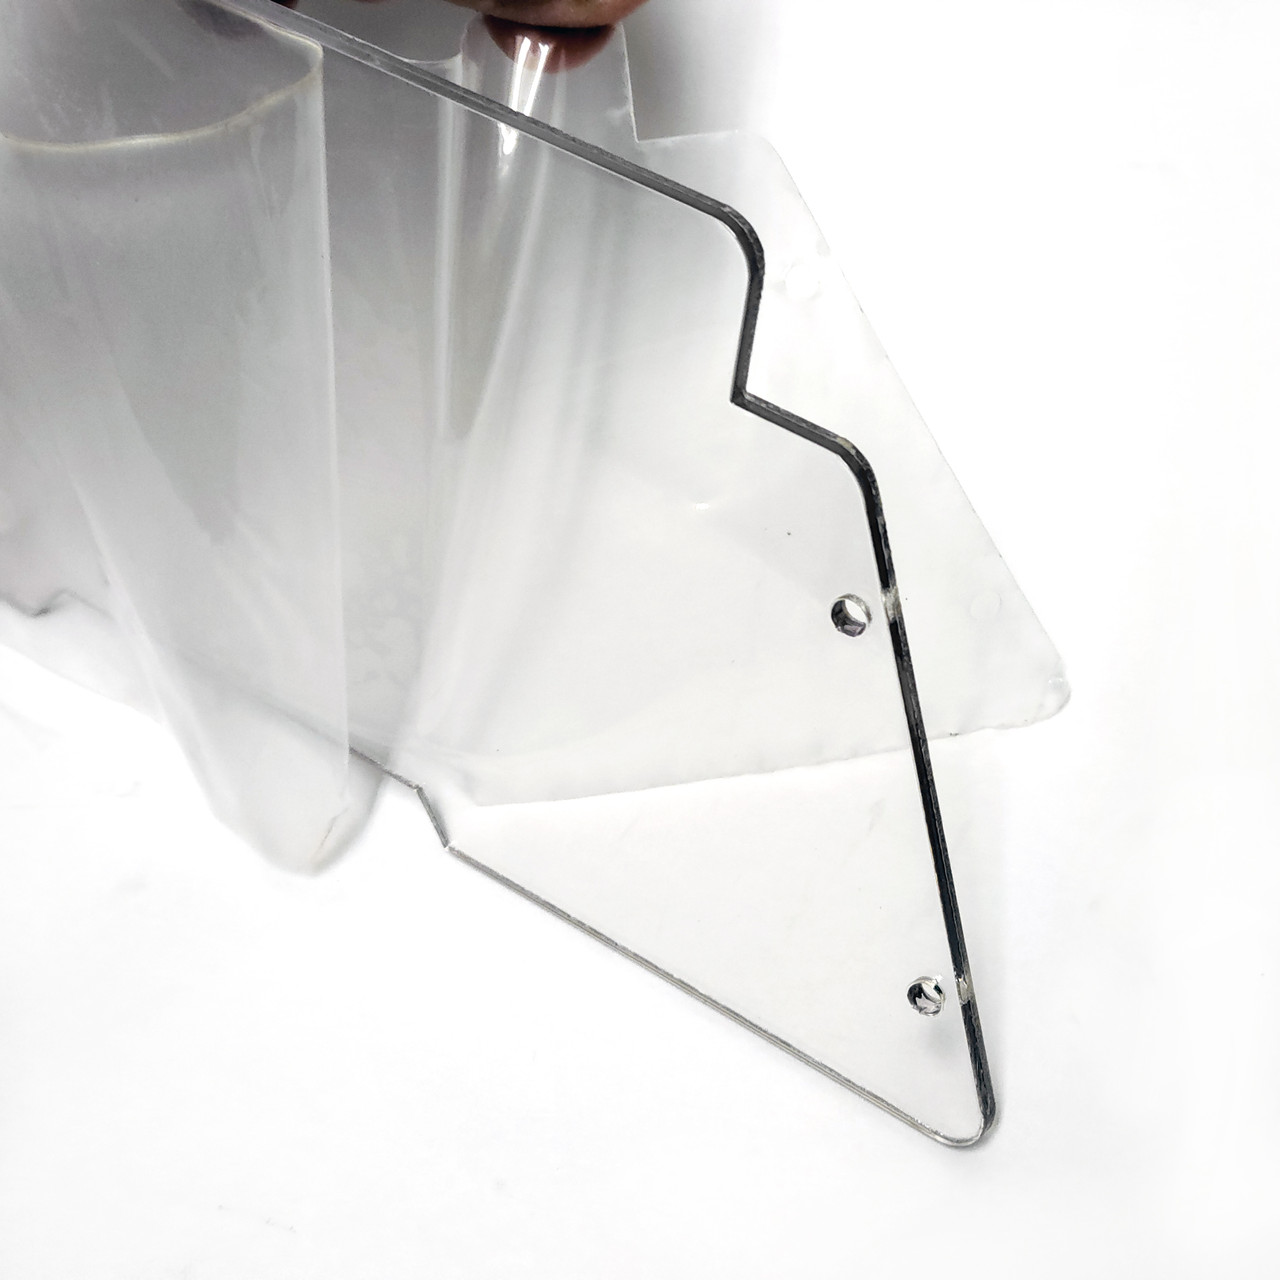 Plastic protective film on both sides of the PETG windshield.  Remove for a crystal clear windshield.